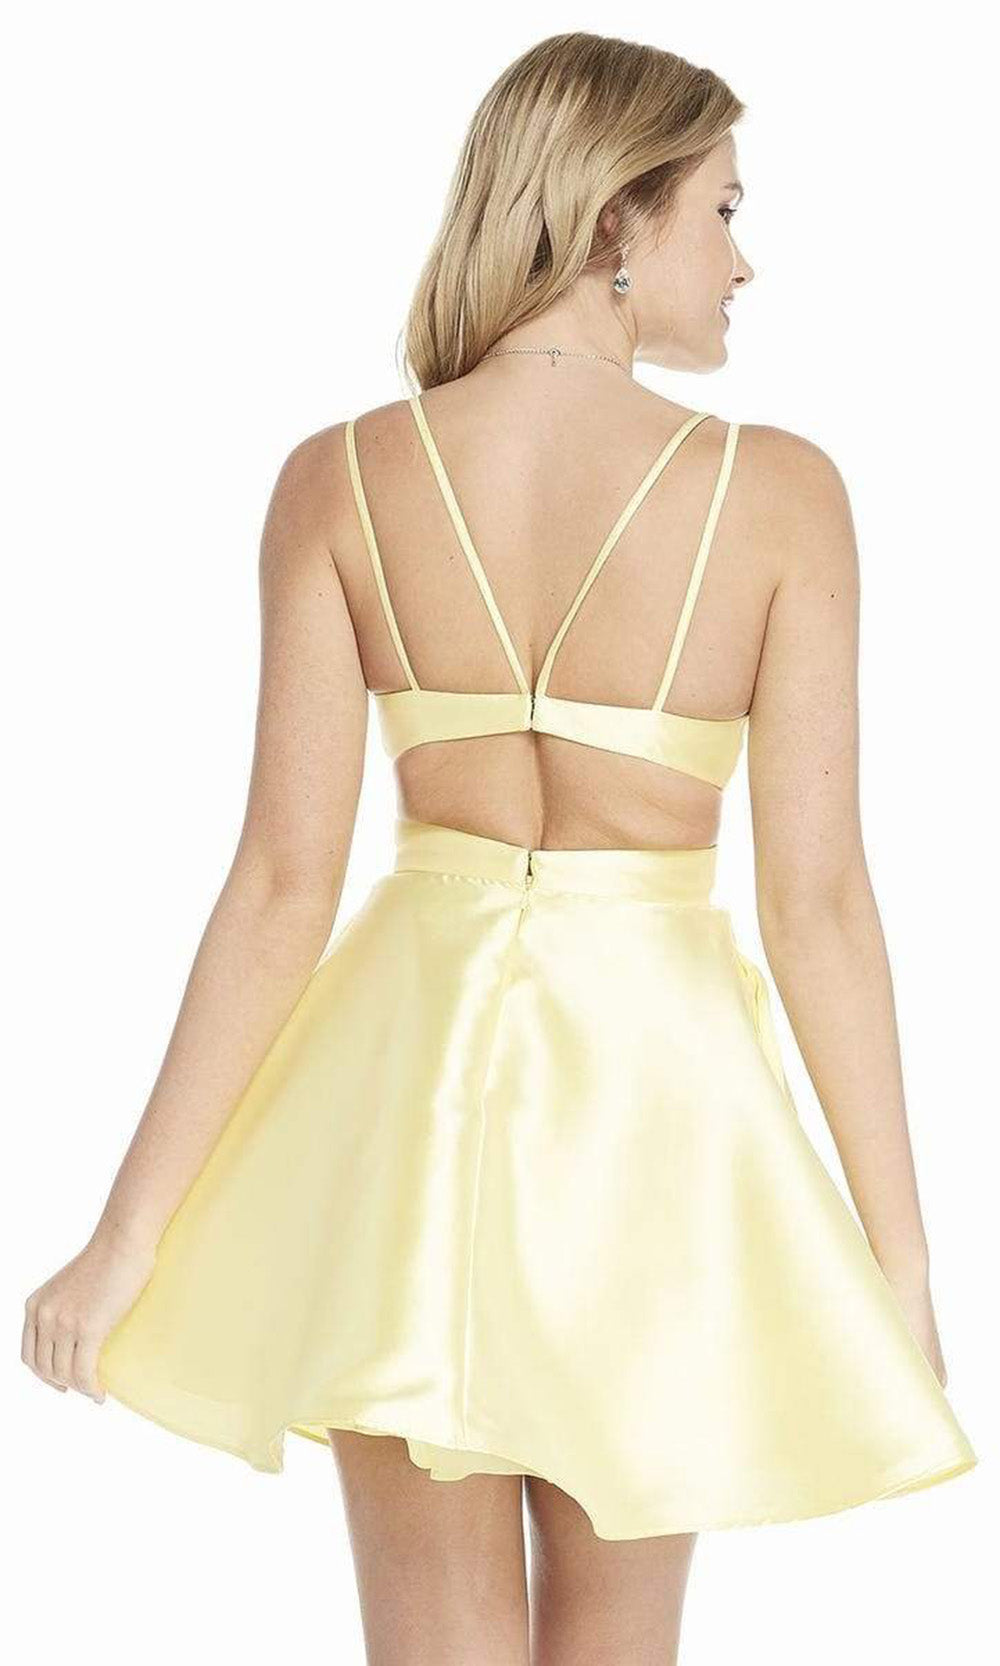 Alyce Paris - 3879 V Neck Cutout Fitted Bodice A-Line Mikado Dress - 1 pc Sunshine In Size 0 Available CCSALE 0 / Sunshine